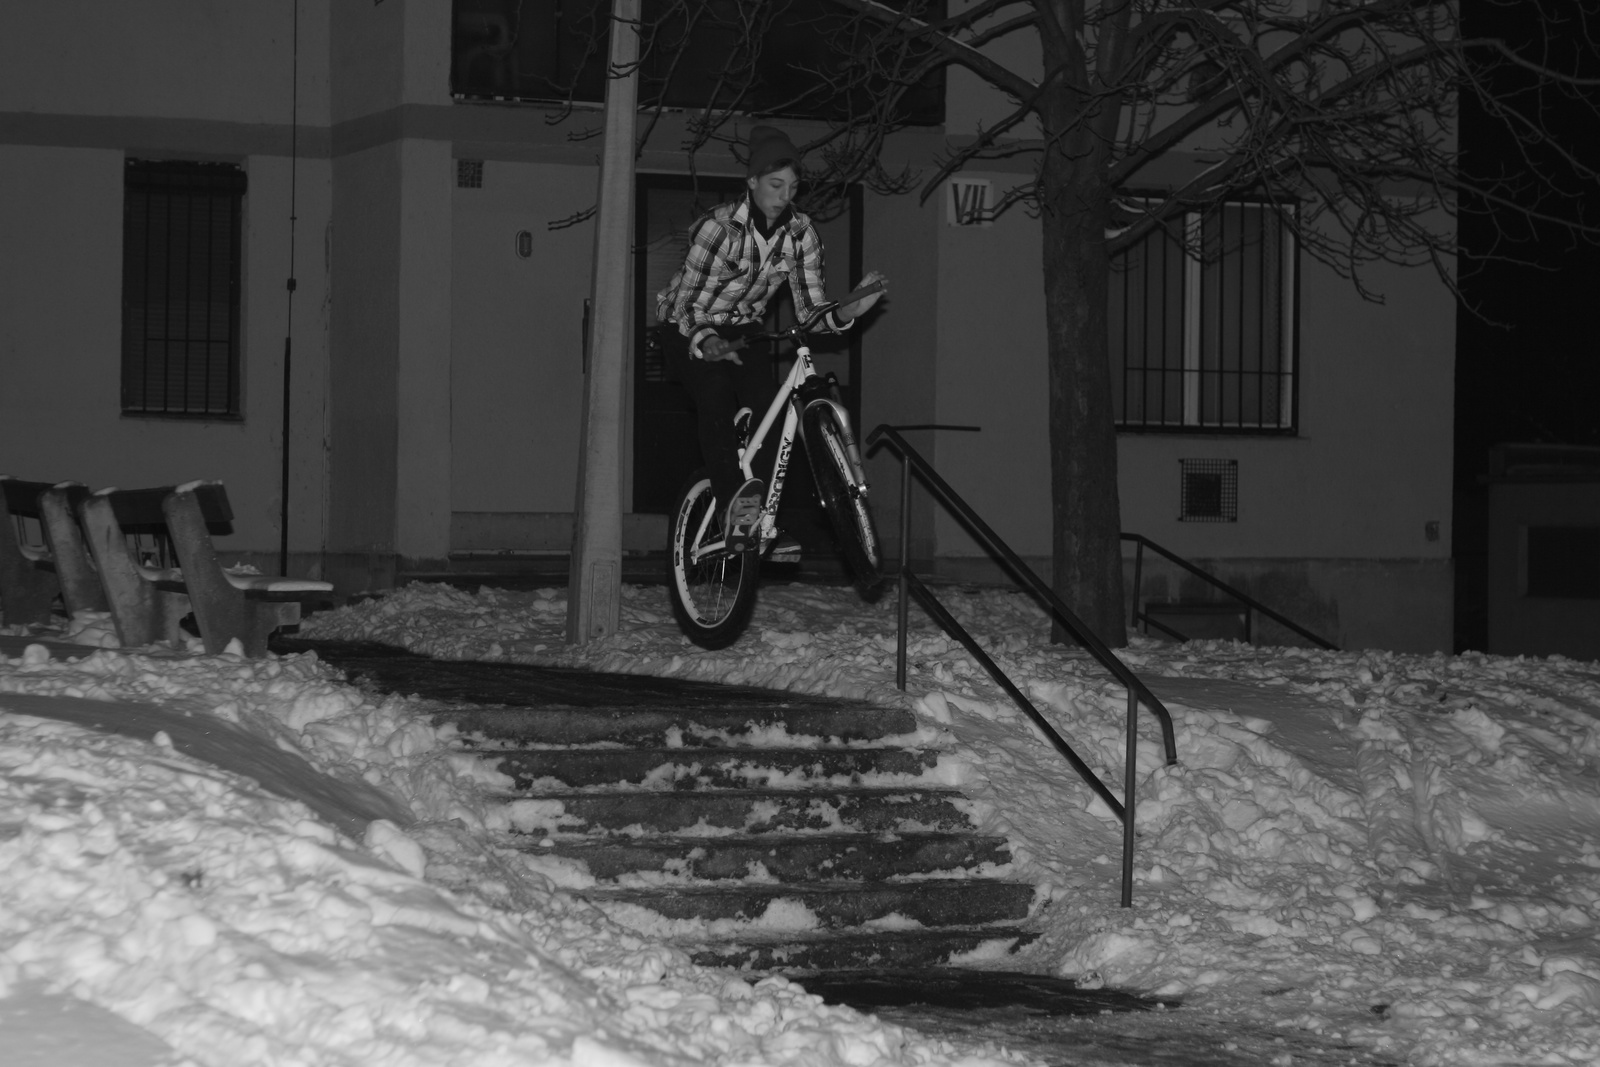 6 stairs barspin (KLB)